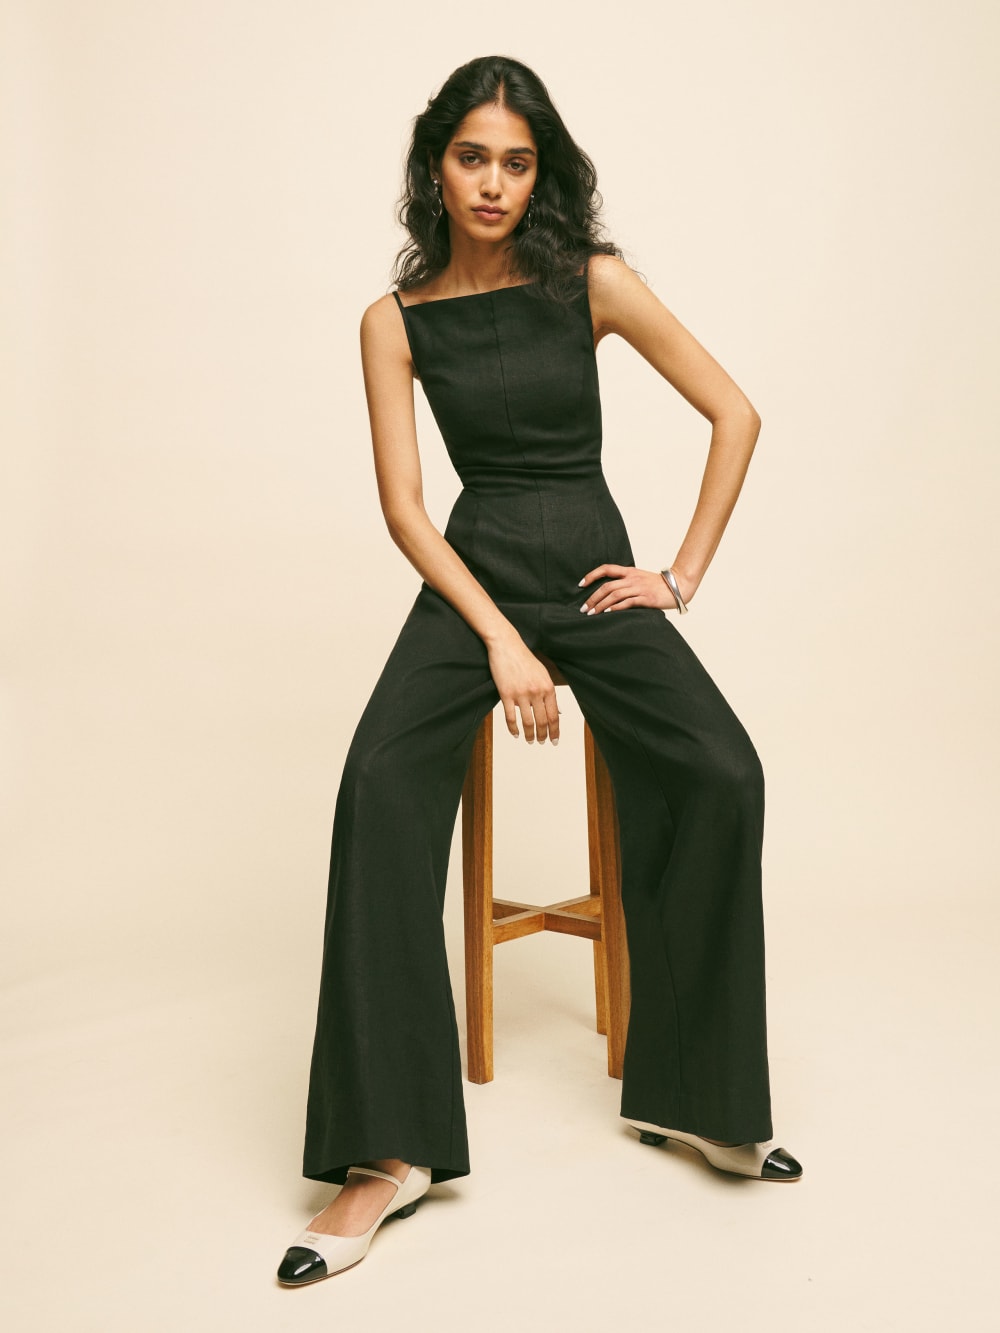 Reformation Ciara linen jumpsuit in black is Designed to be fitted at bodice with a relaxed leg.